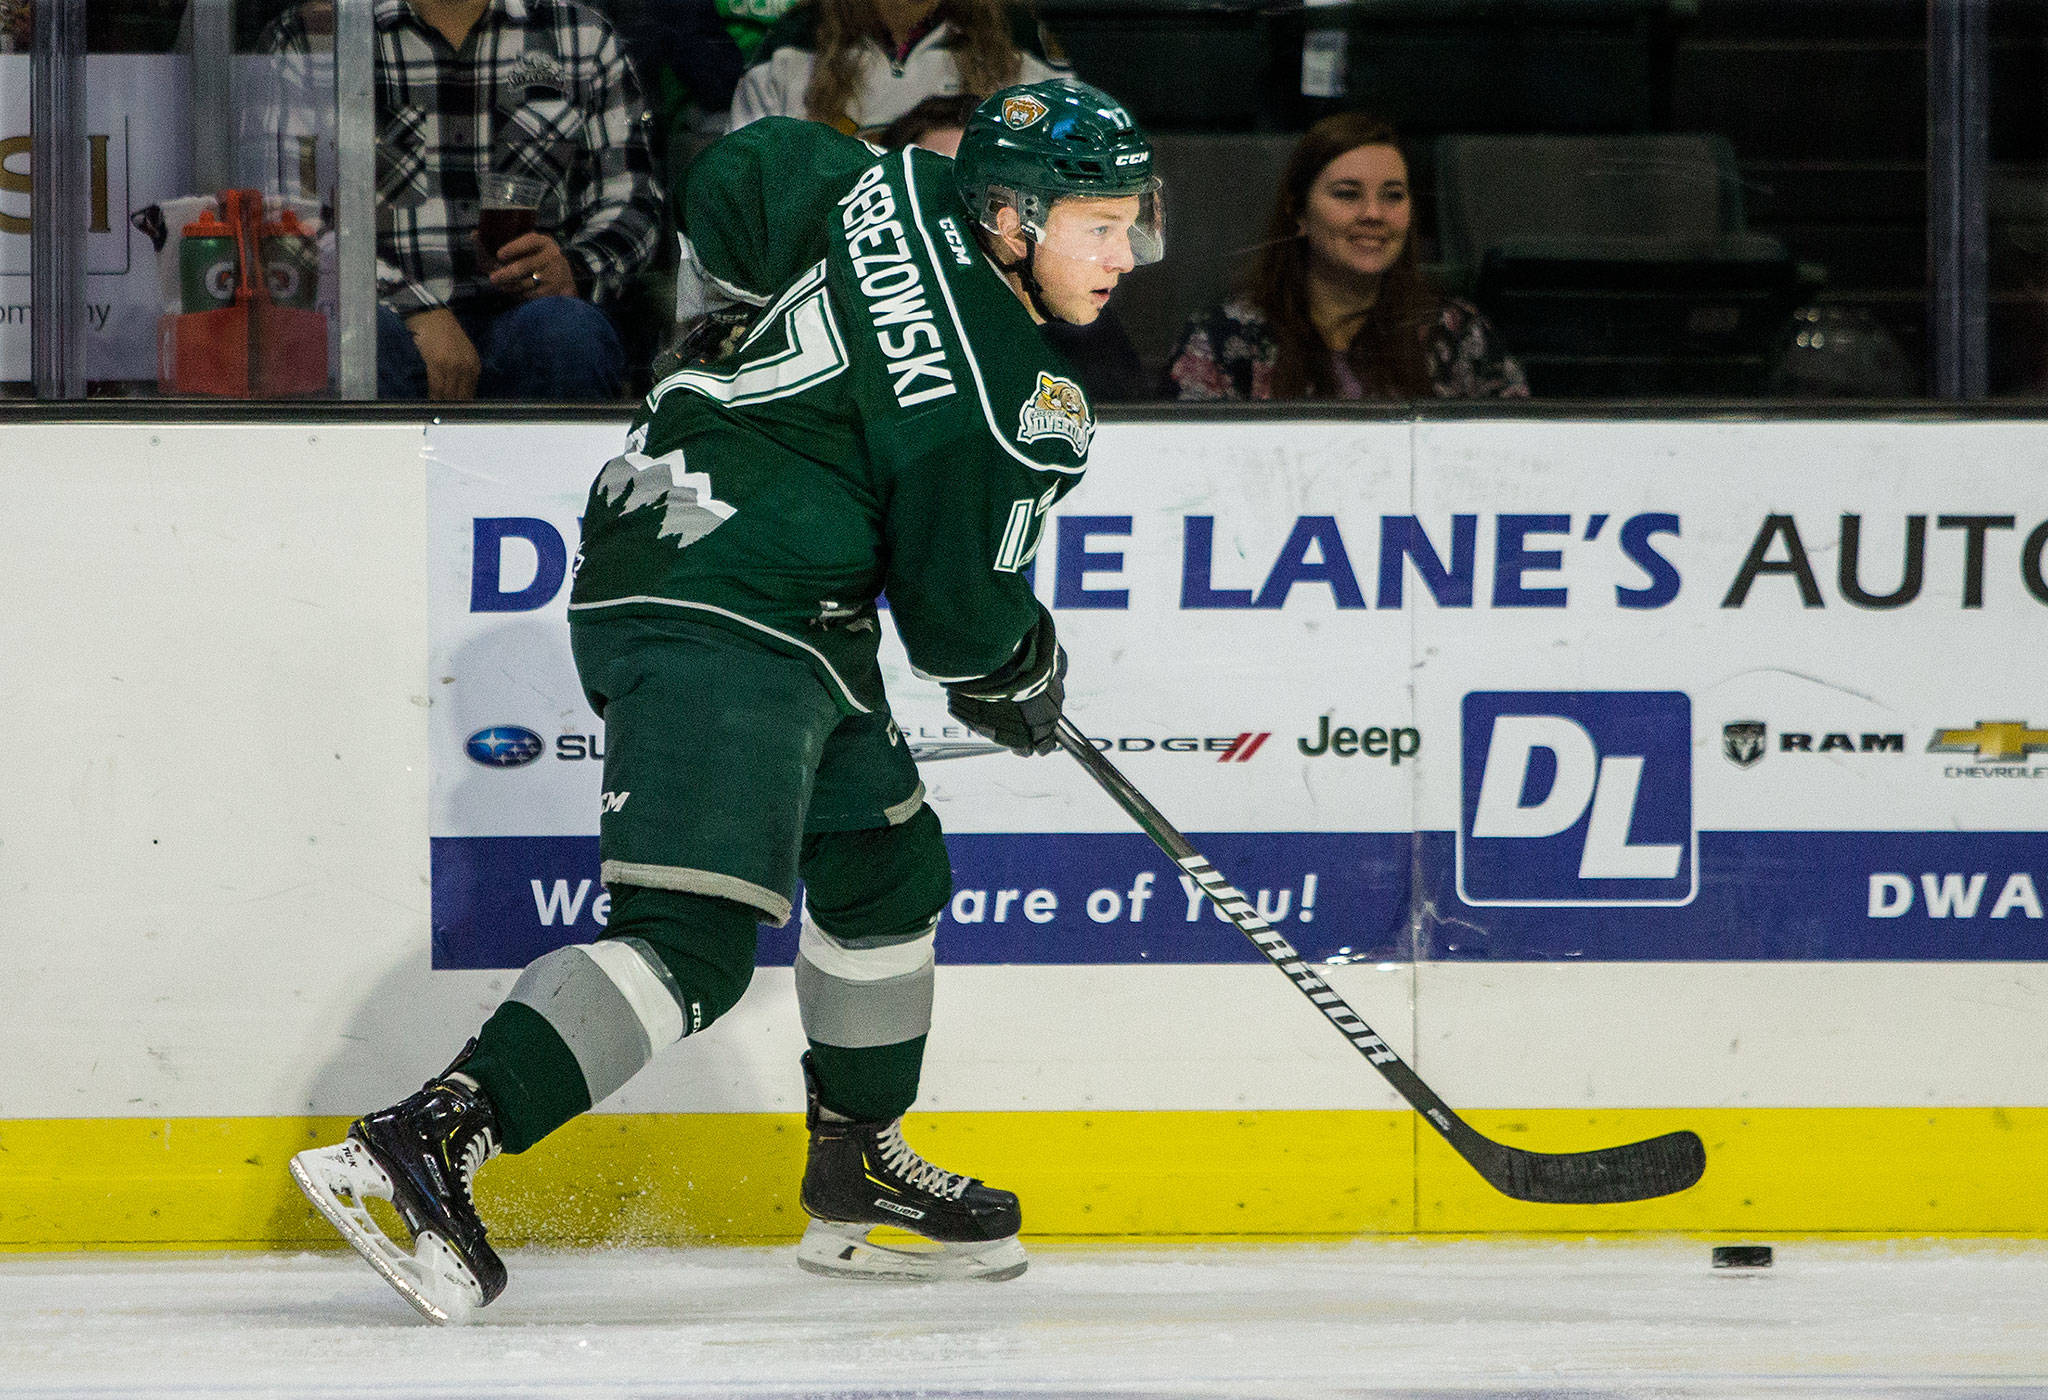 Everett Silvertips’ Jackson Berezowski skates after the puck during the game Sunday, Nov. 18, against the Spokane Chiefs at Angel of the Winds Arena in Everett. (Olivia Vanni / The Herald)